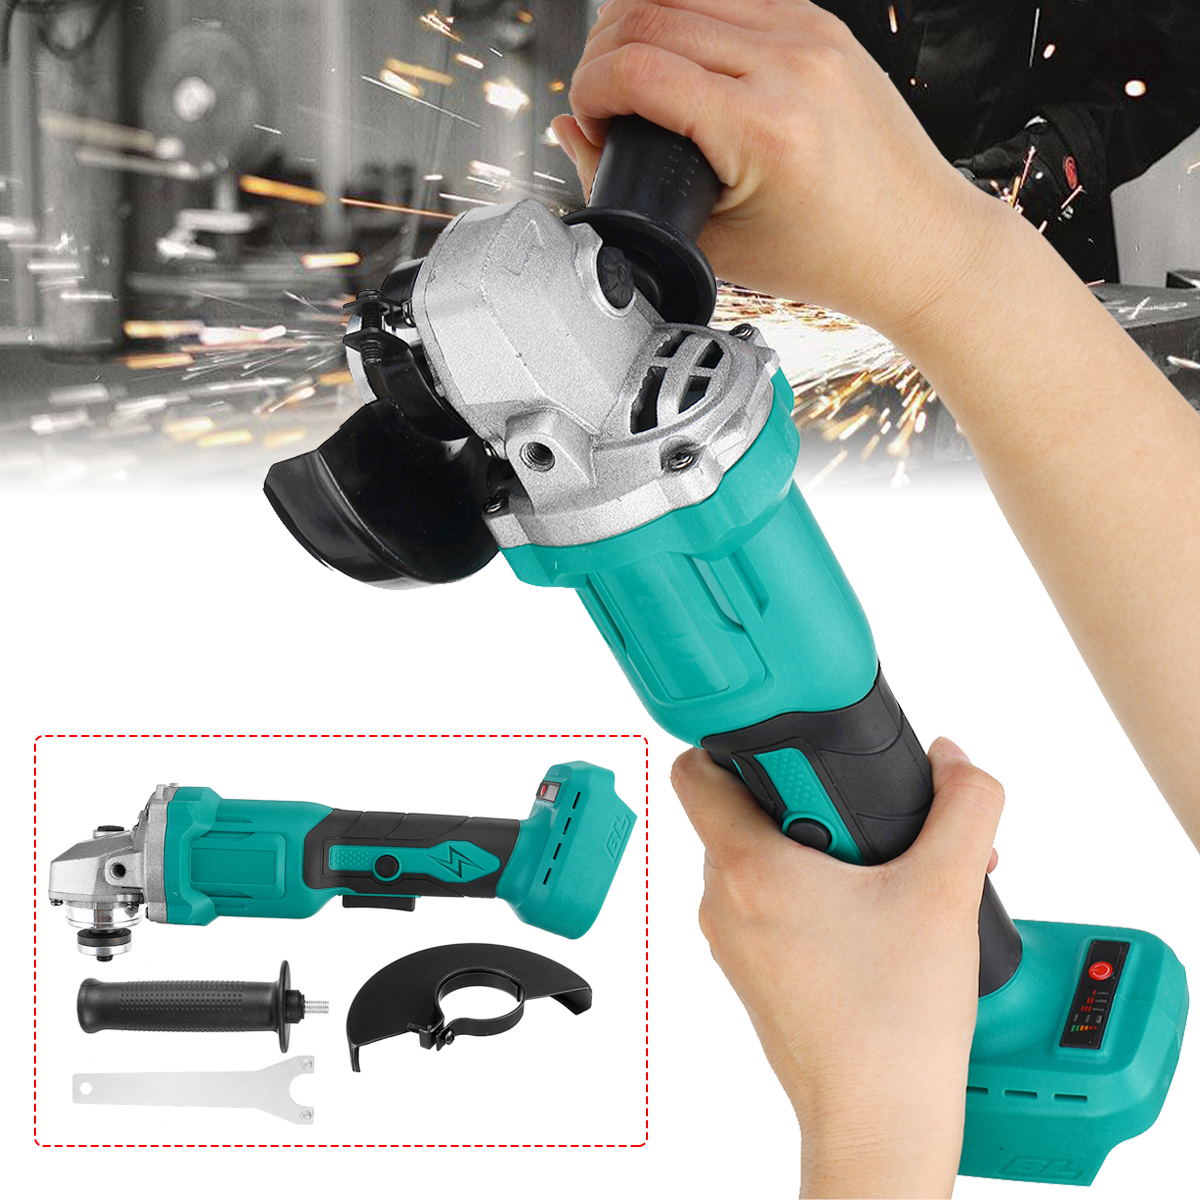 100mm-Brushless-Electric-Angle-Grinder-Grinding-Machine-Cordless-DIY-Woodworking-Power-Tool-1764625-3